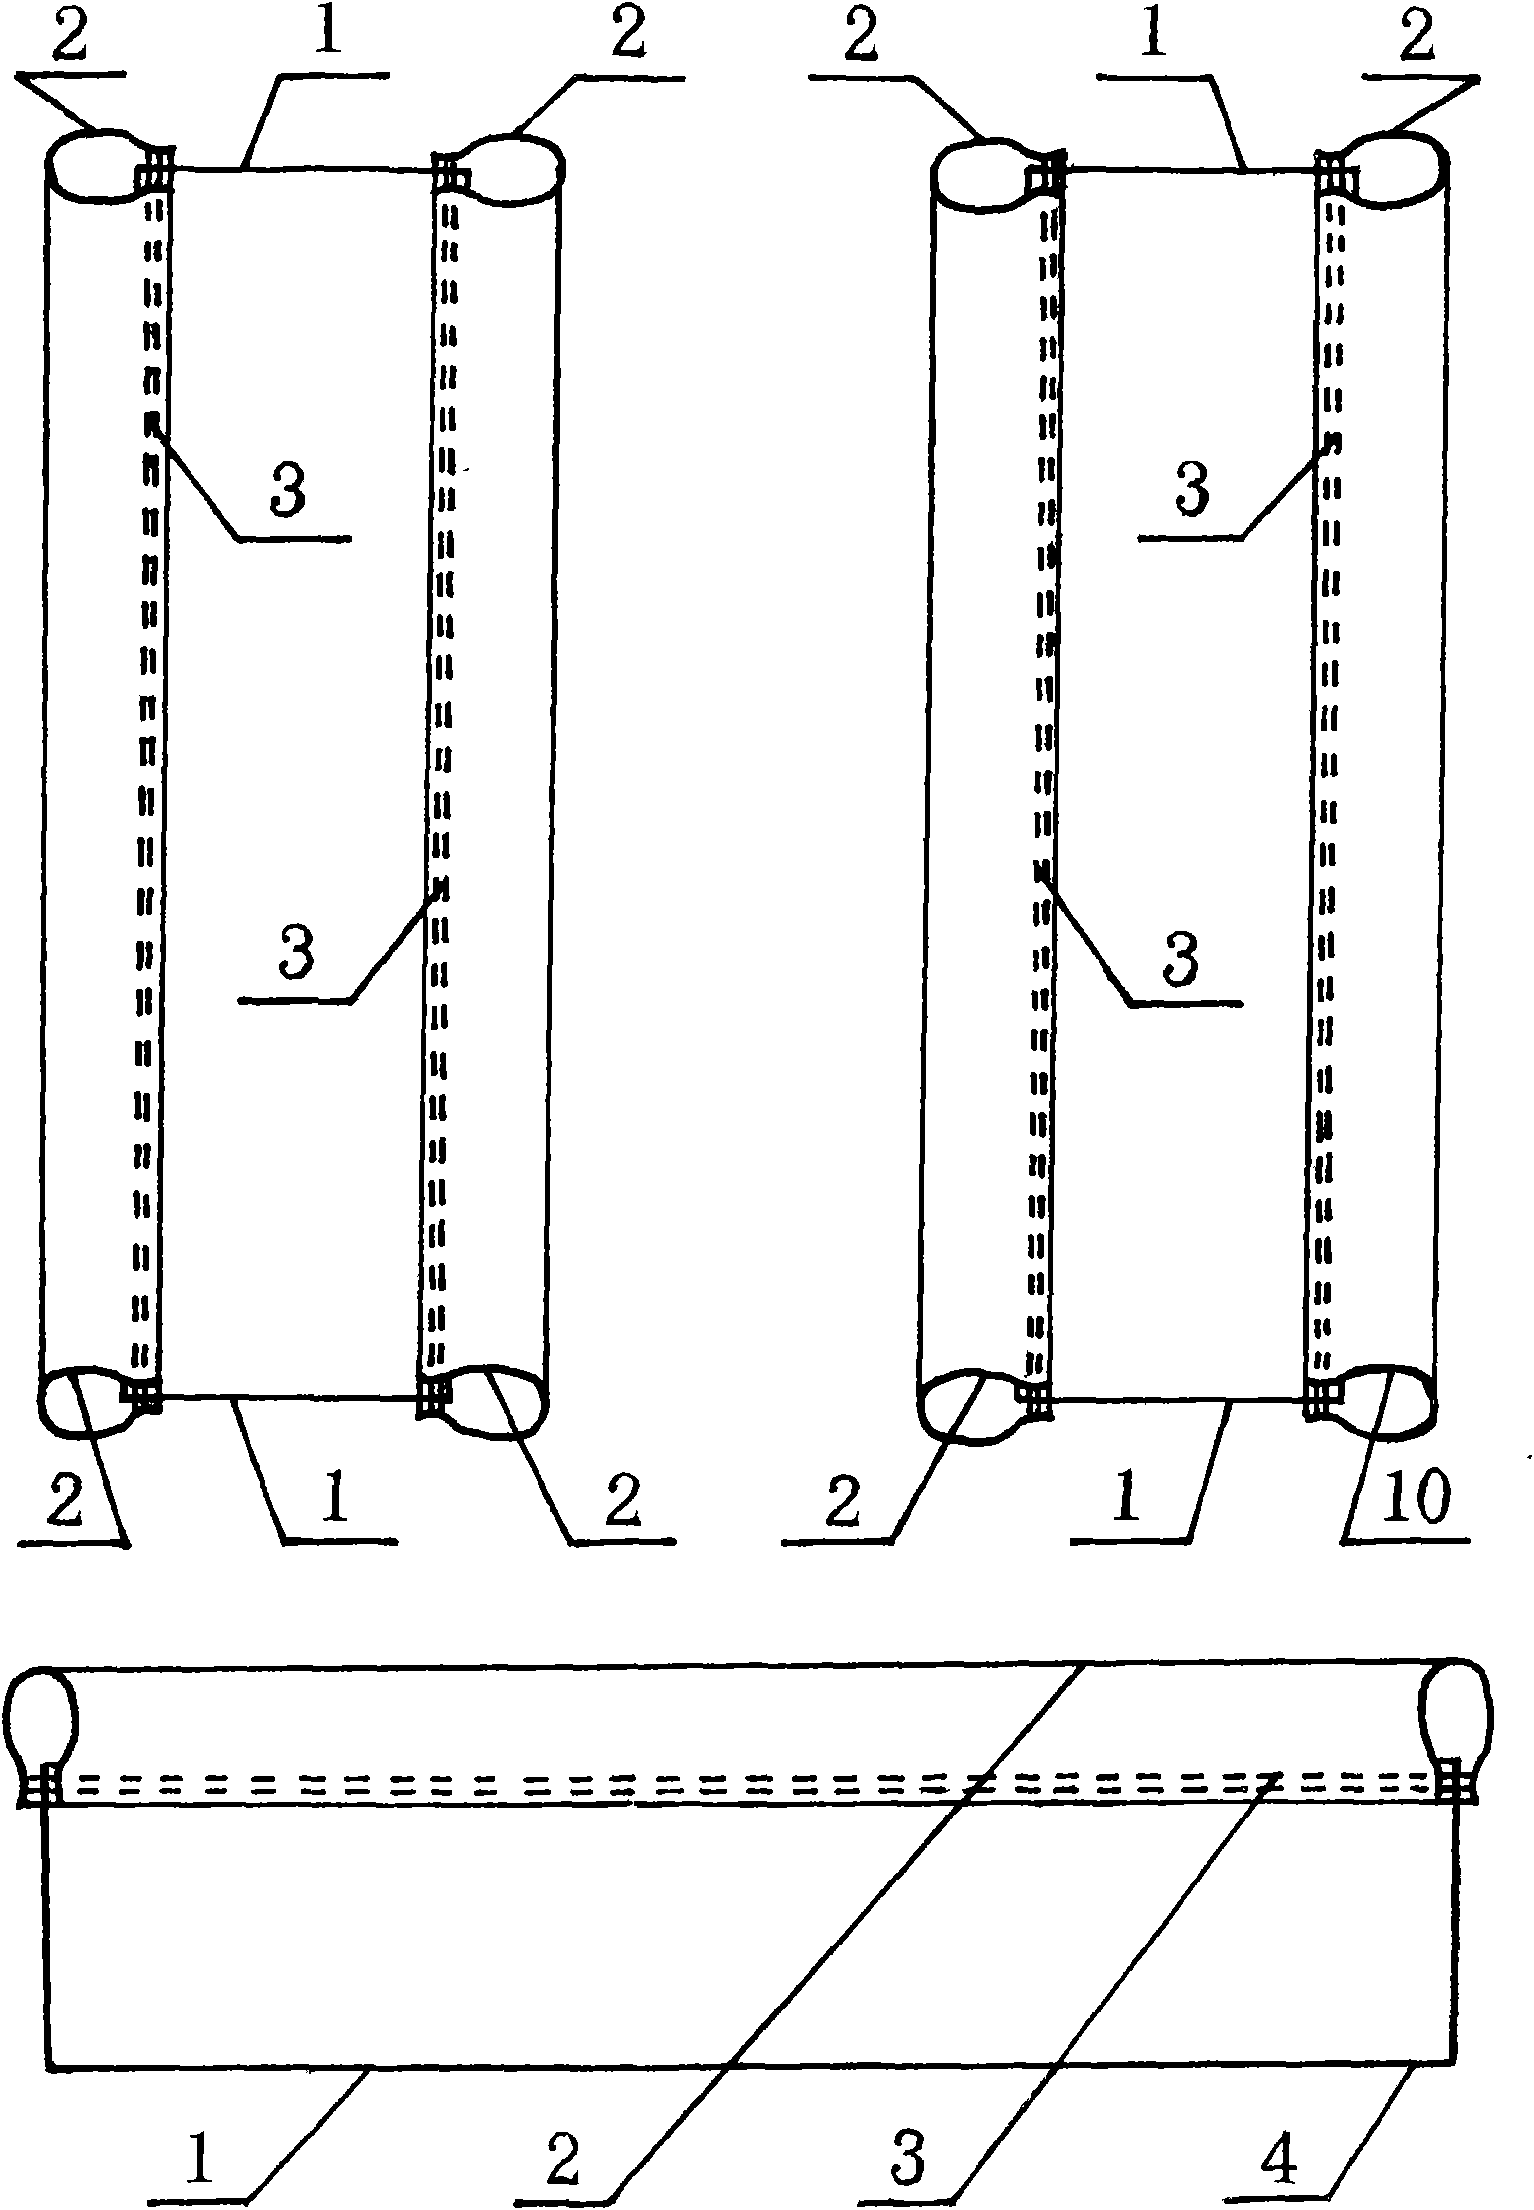 Isolating curtain for preventing and controlling A (H1N1) flu